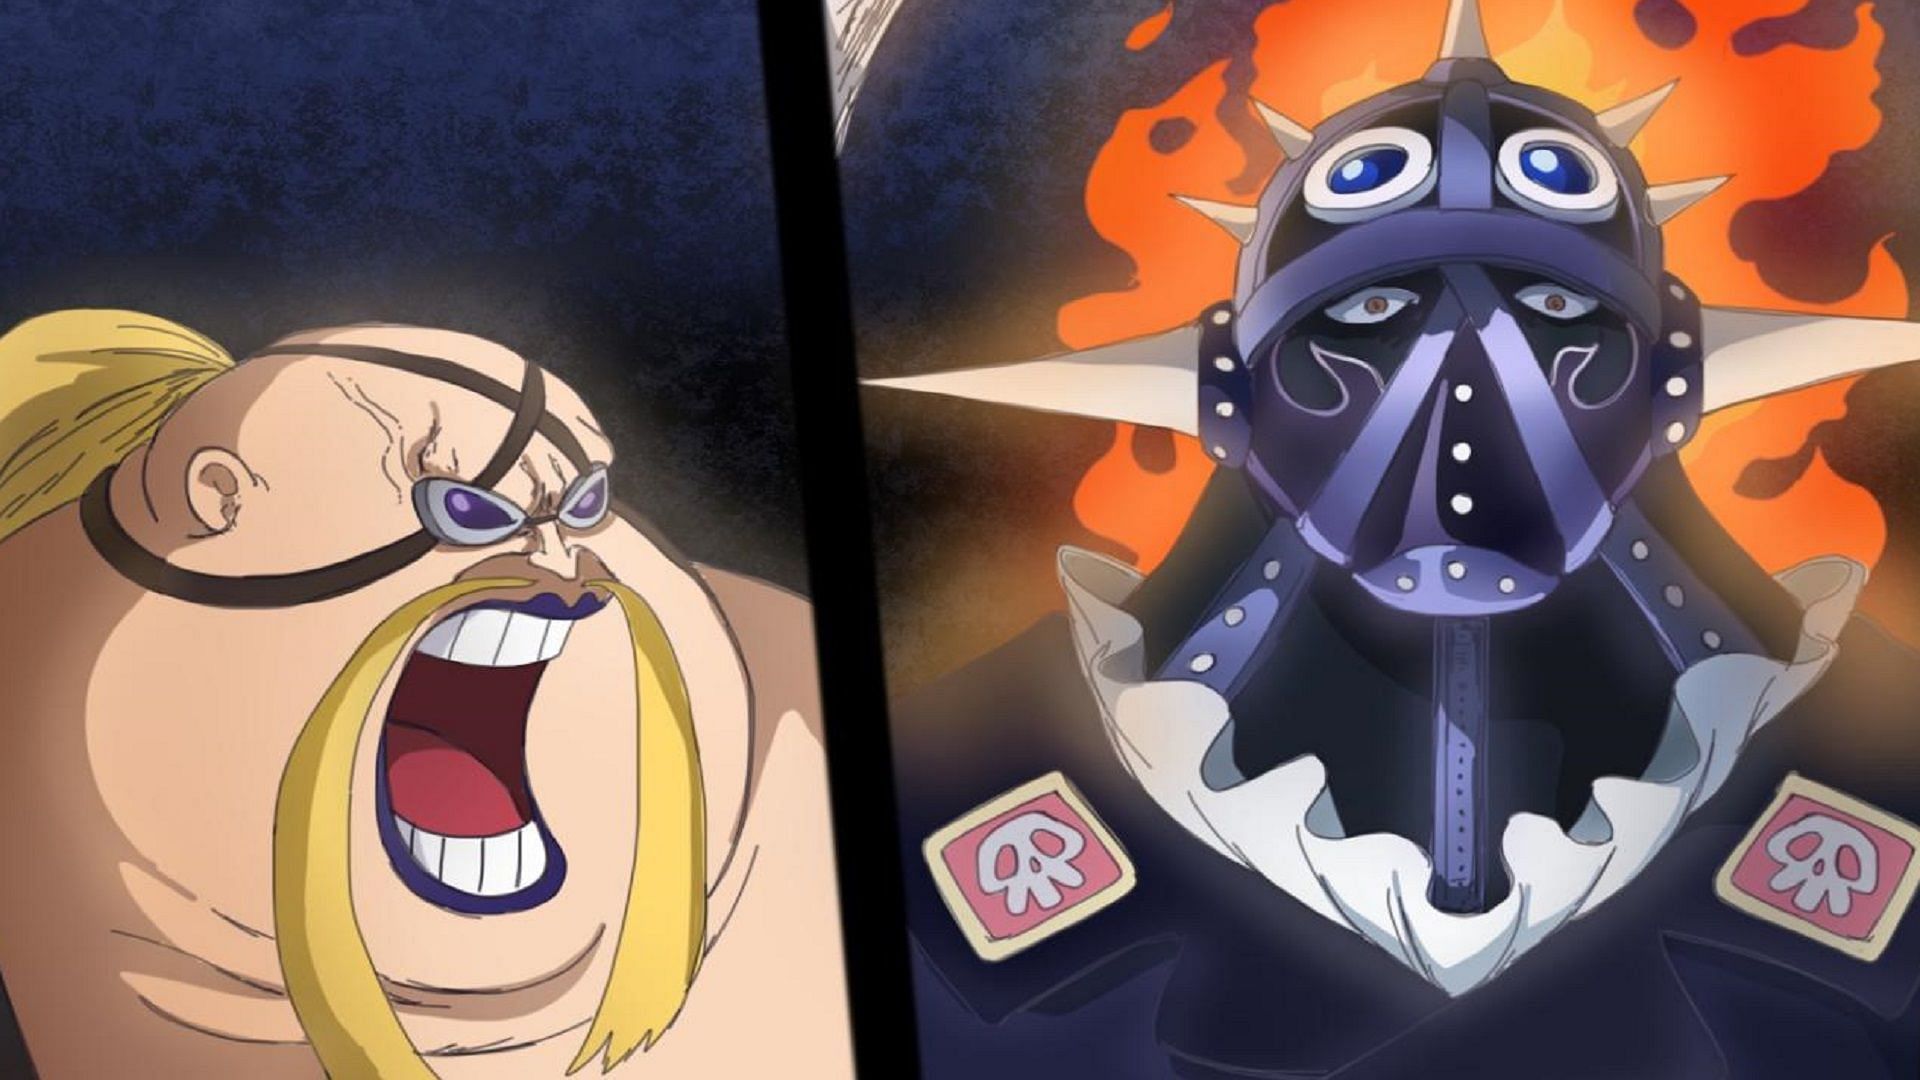 Most One Piece fans agree that King is a far strongest fighter than Queen, however there